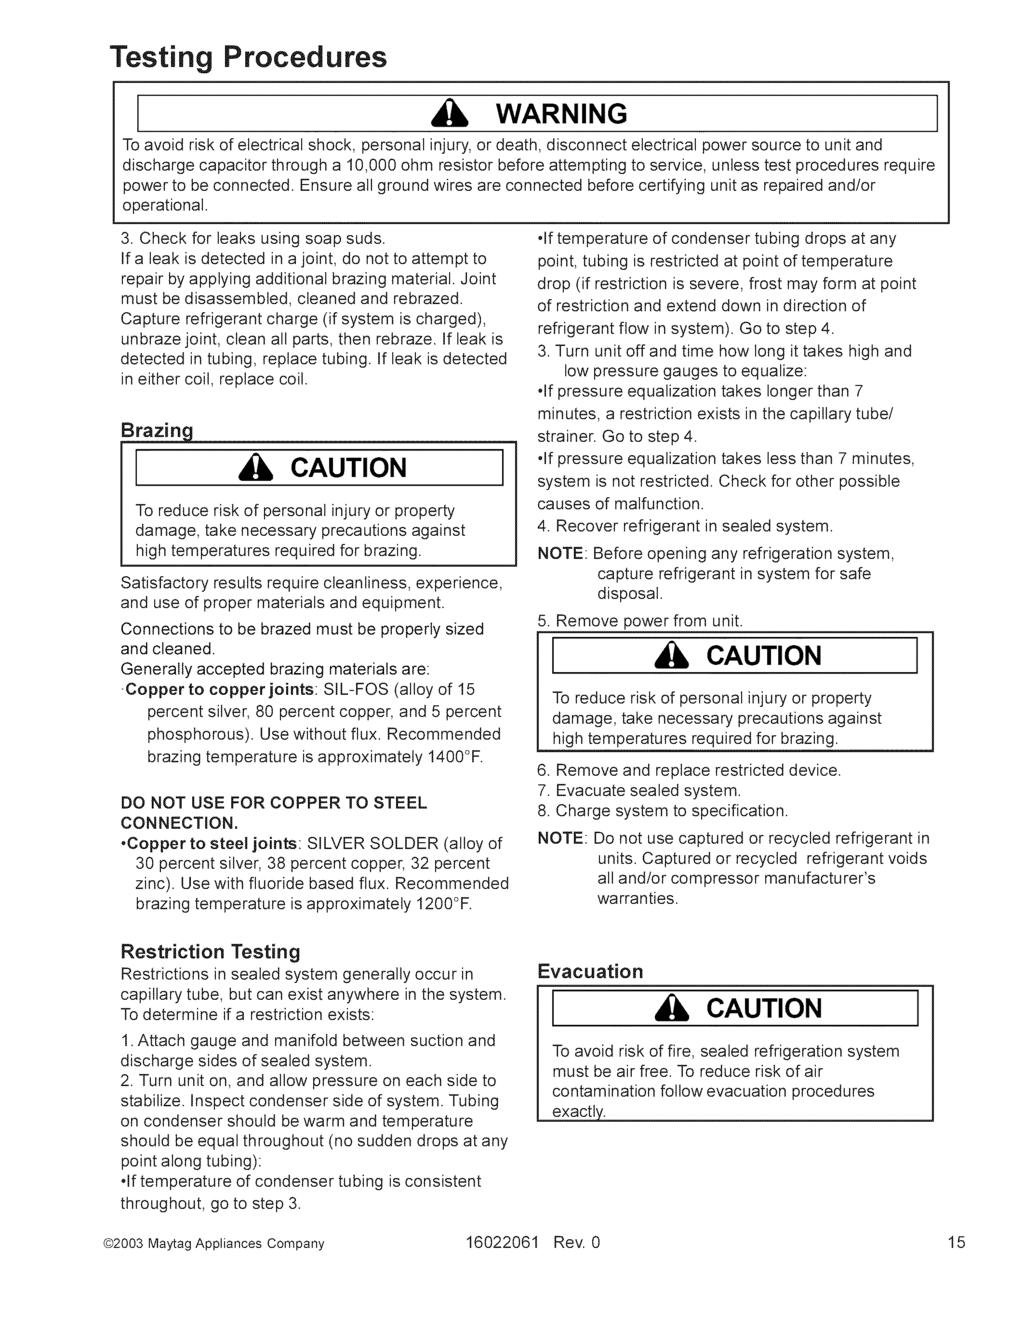 Testing Procedures WARNING To avoid risk of electrical shock, personal injury, or death, disconnect electrical power source to unit and discharge capacitor through a 10,000 ohm resistor before